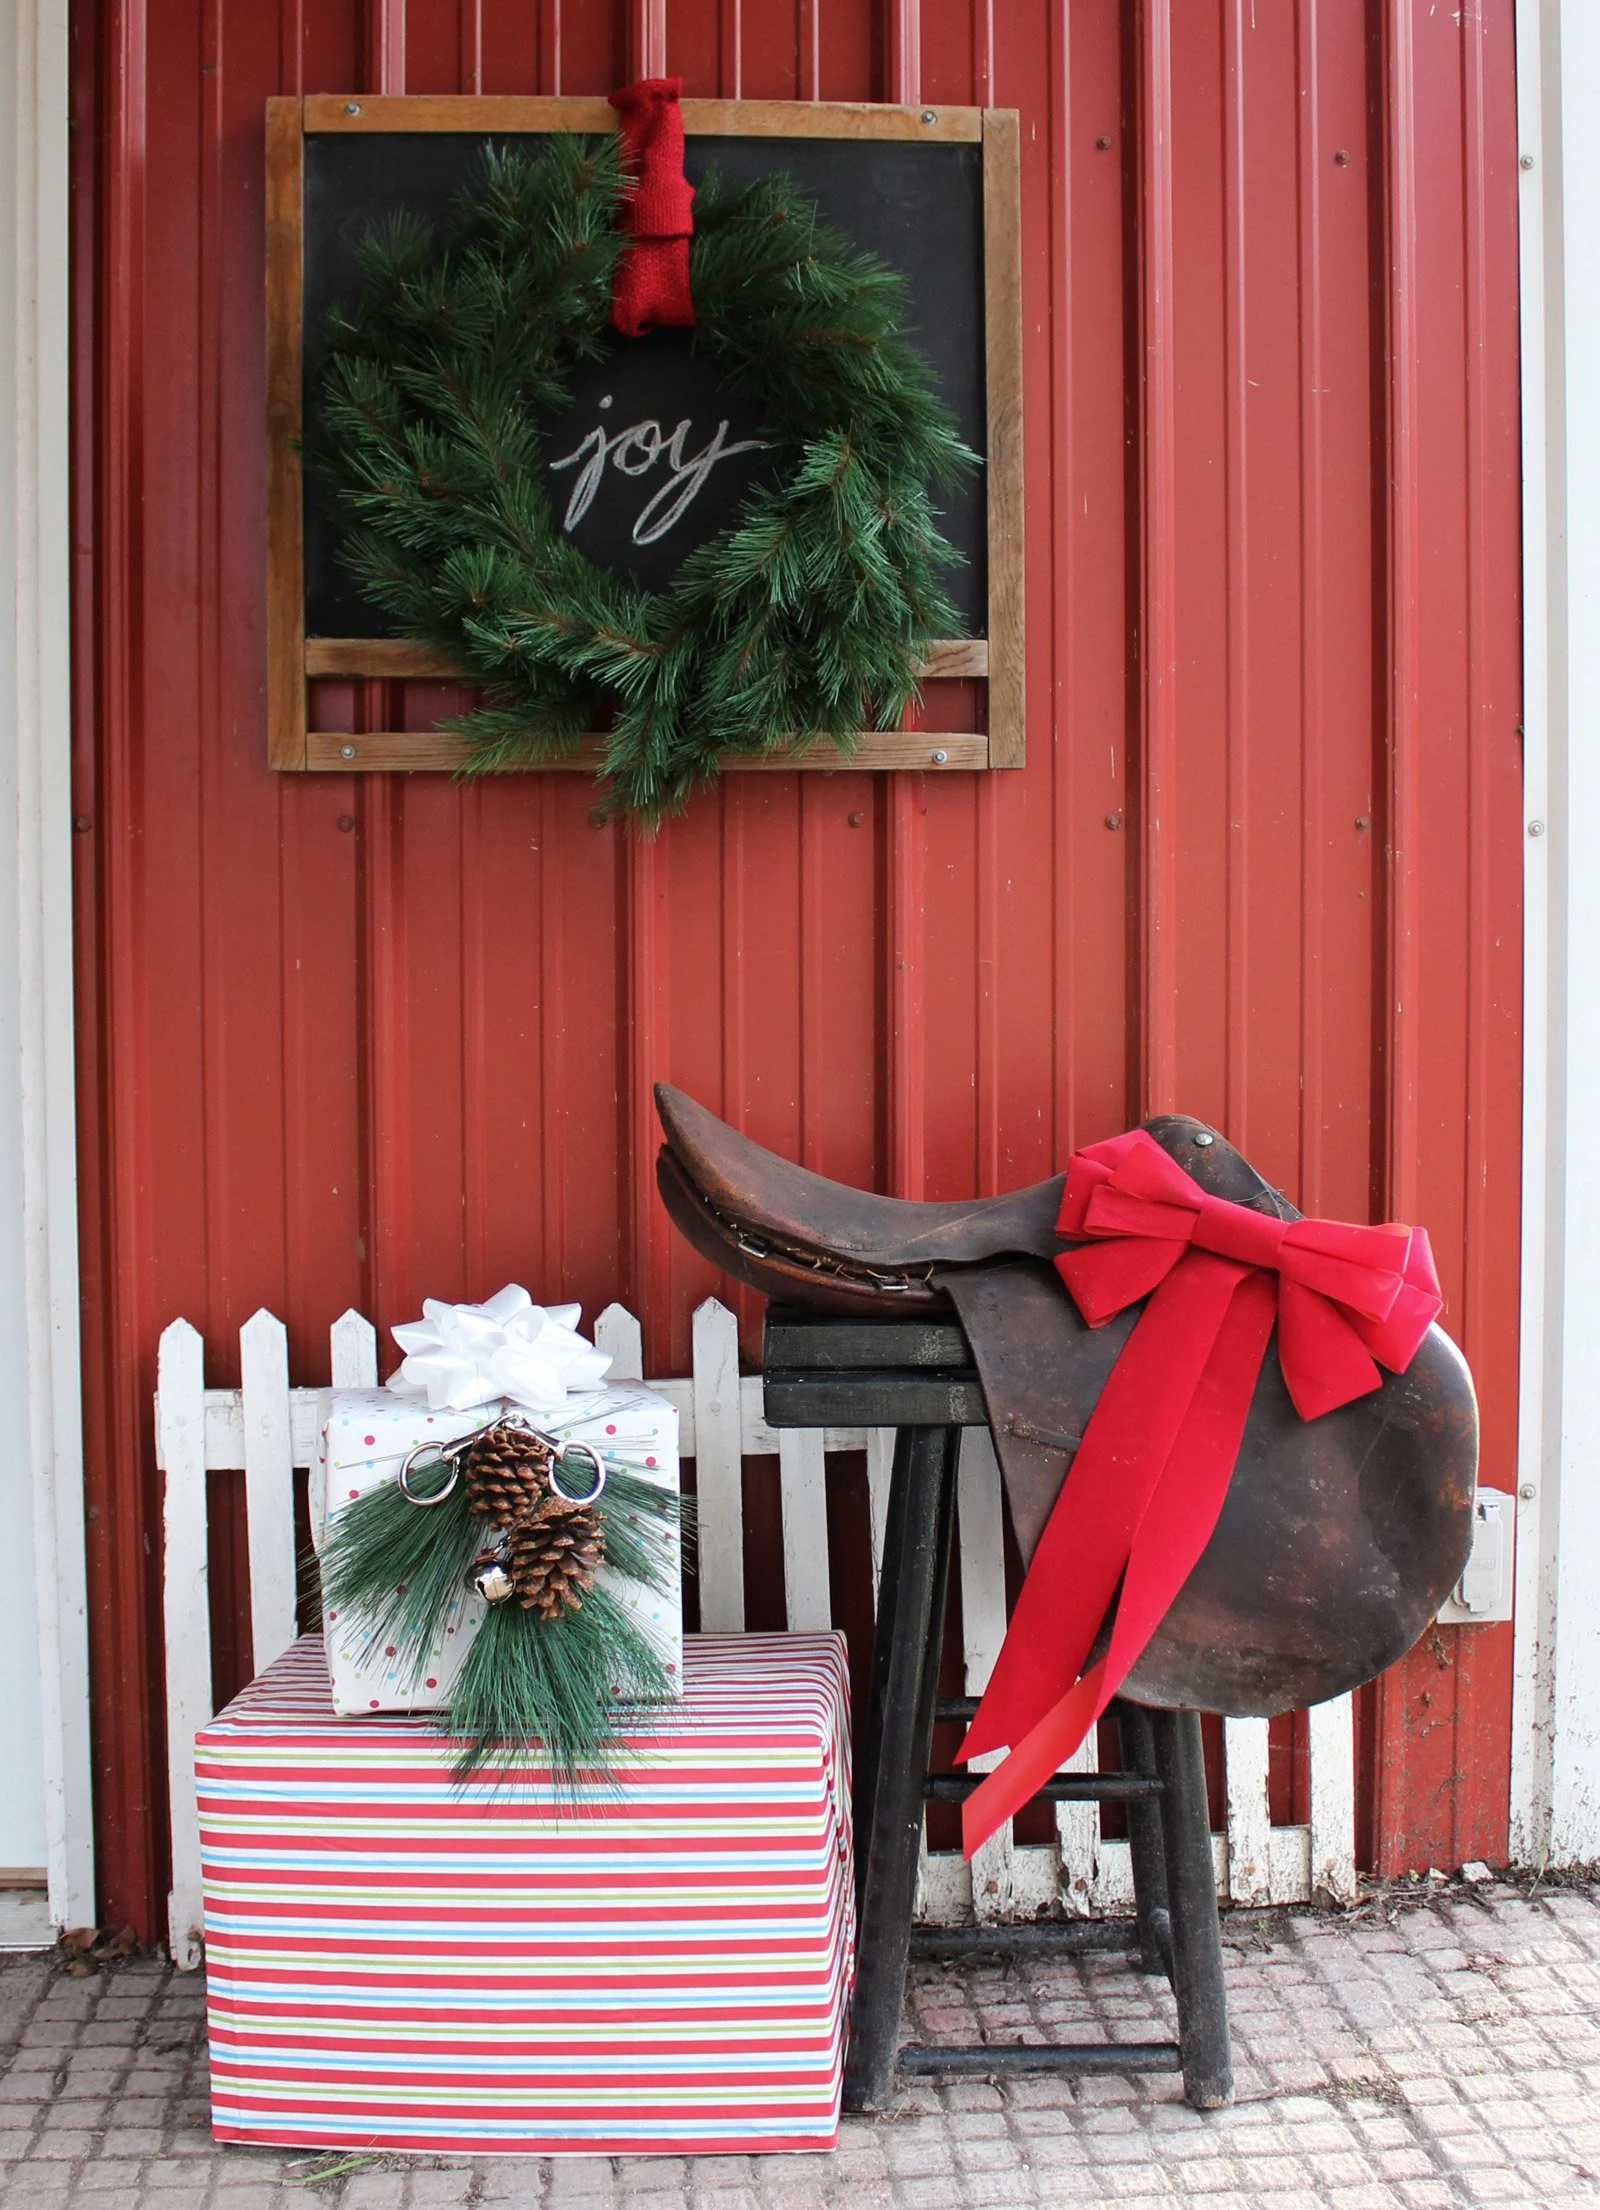 outdoor christmas decorations featuring equestrian english saddle, wrapped gifts, chalkboard, wreaths, silver bells, and snaffle bit